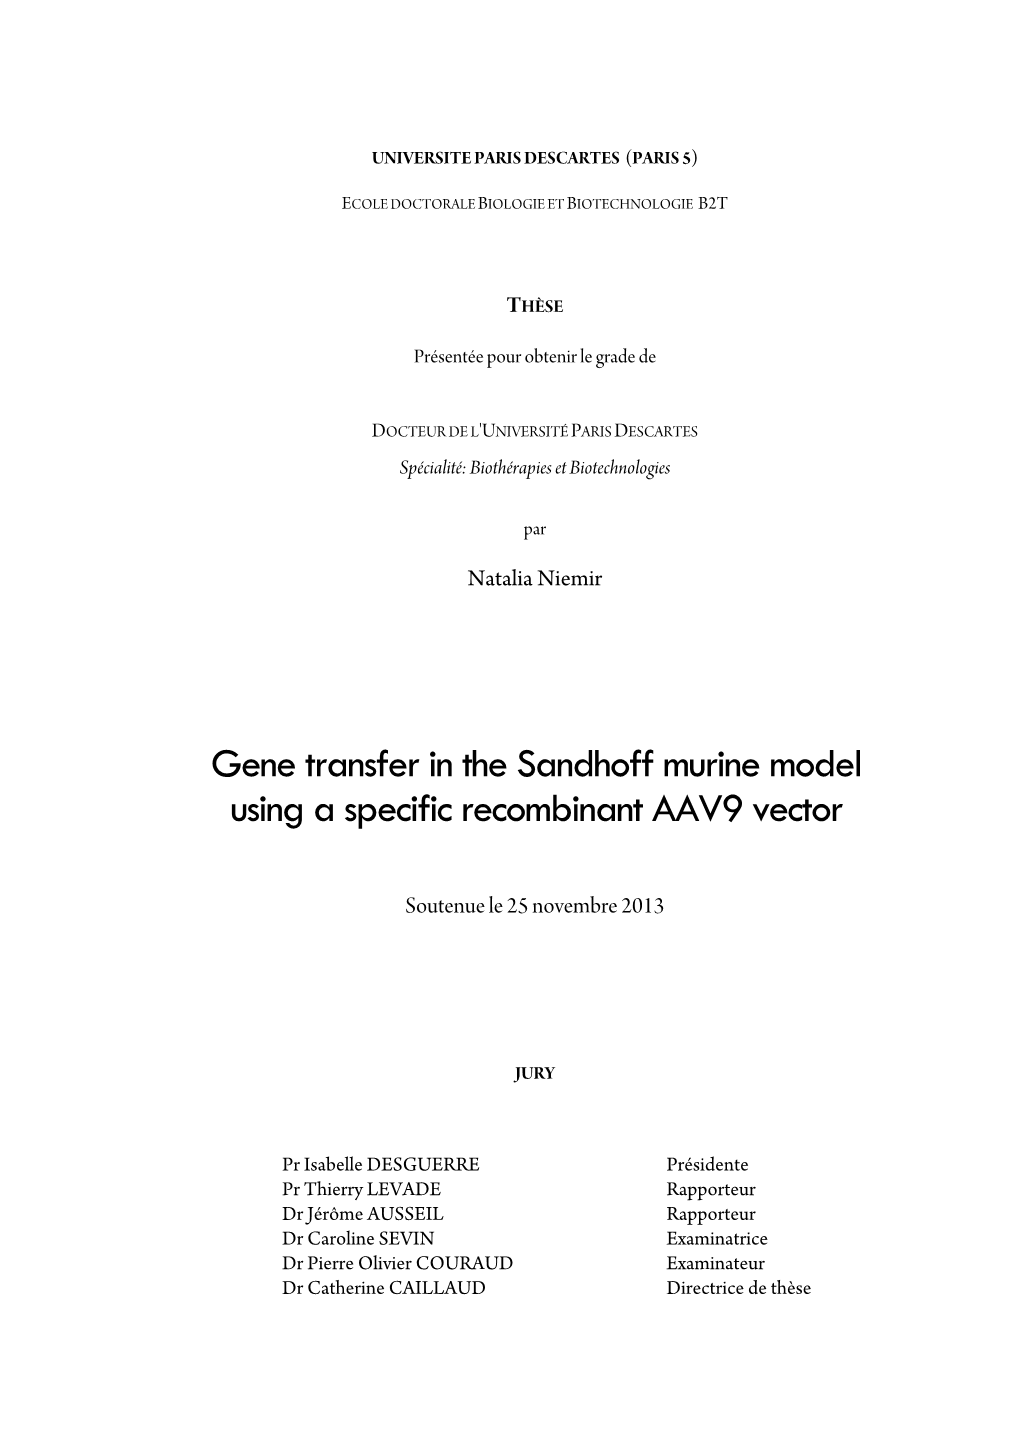 Gene Transfer in the Sandhoff Murine Model Using a Specific Recombinant AAV9 Vector